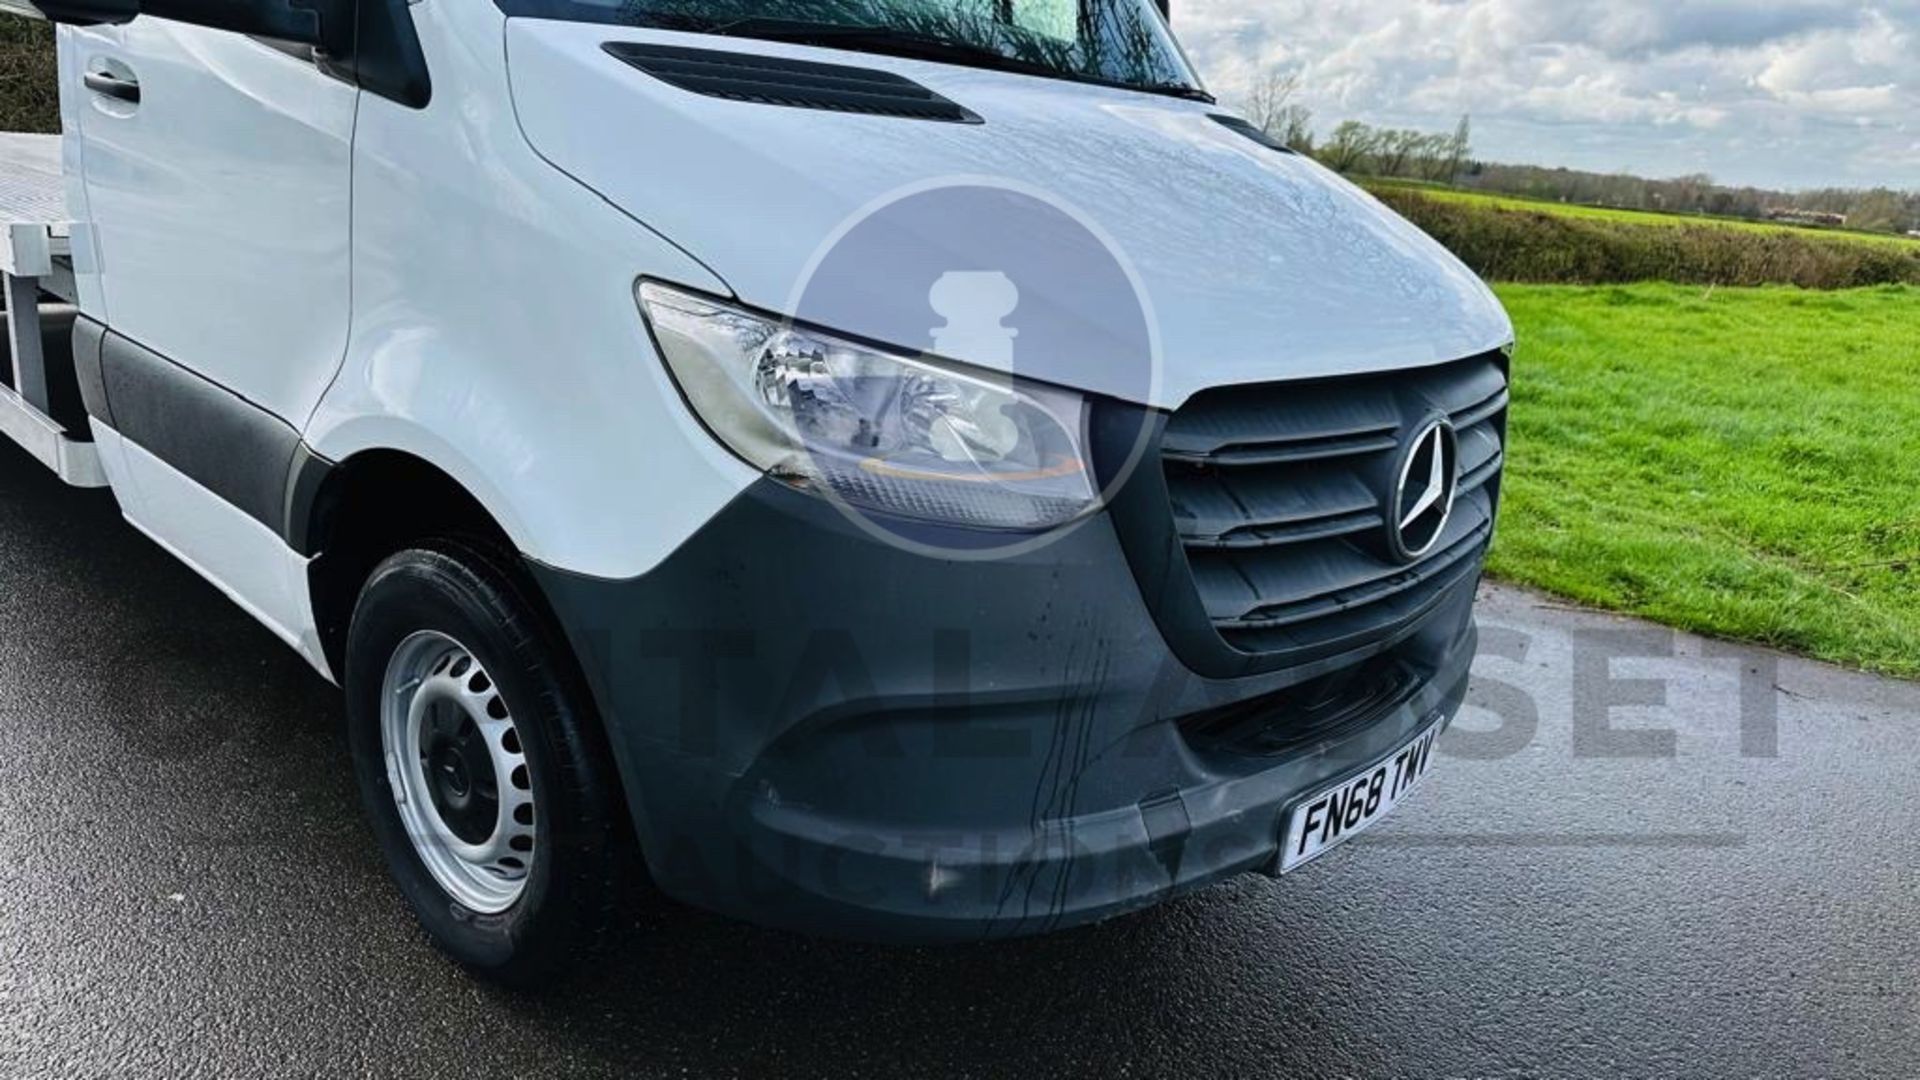 MERCEDES SPRINTER 314CDI "LWB RECOVERY TRUCK" 2019 MODEL - 1 OWNER - NEW BODY FITTED WITH ELEC WINCH - Image 4 of 37